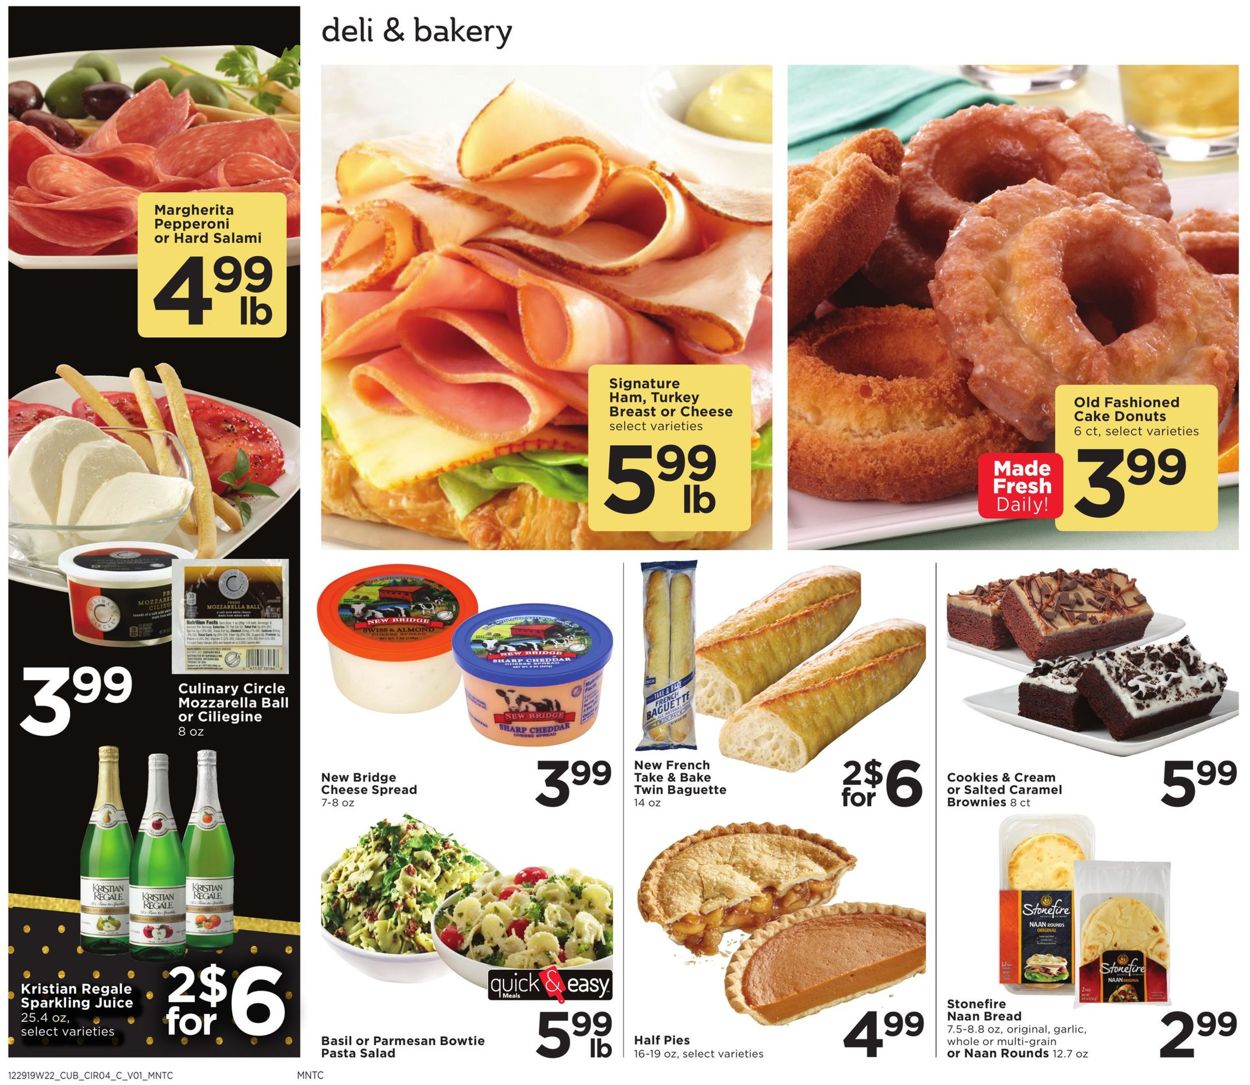 Catalogue Cub Foods - New Year's Ad 2019/2020 from 12/29/2019